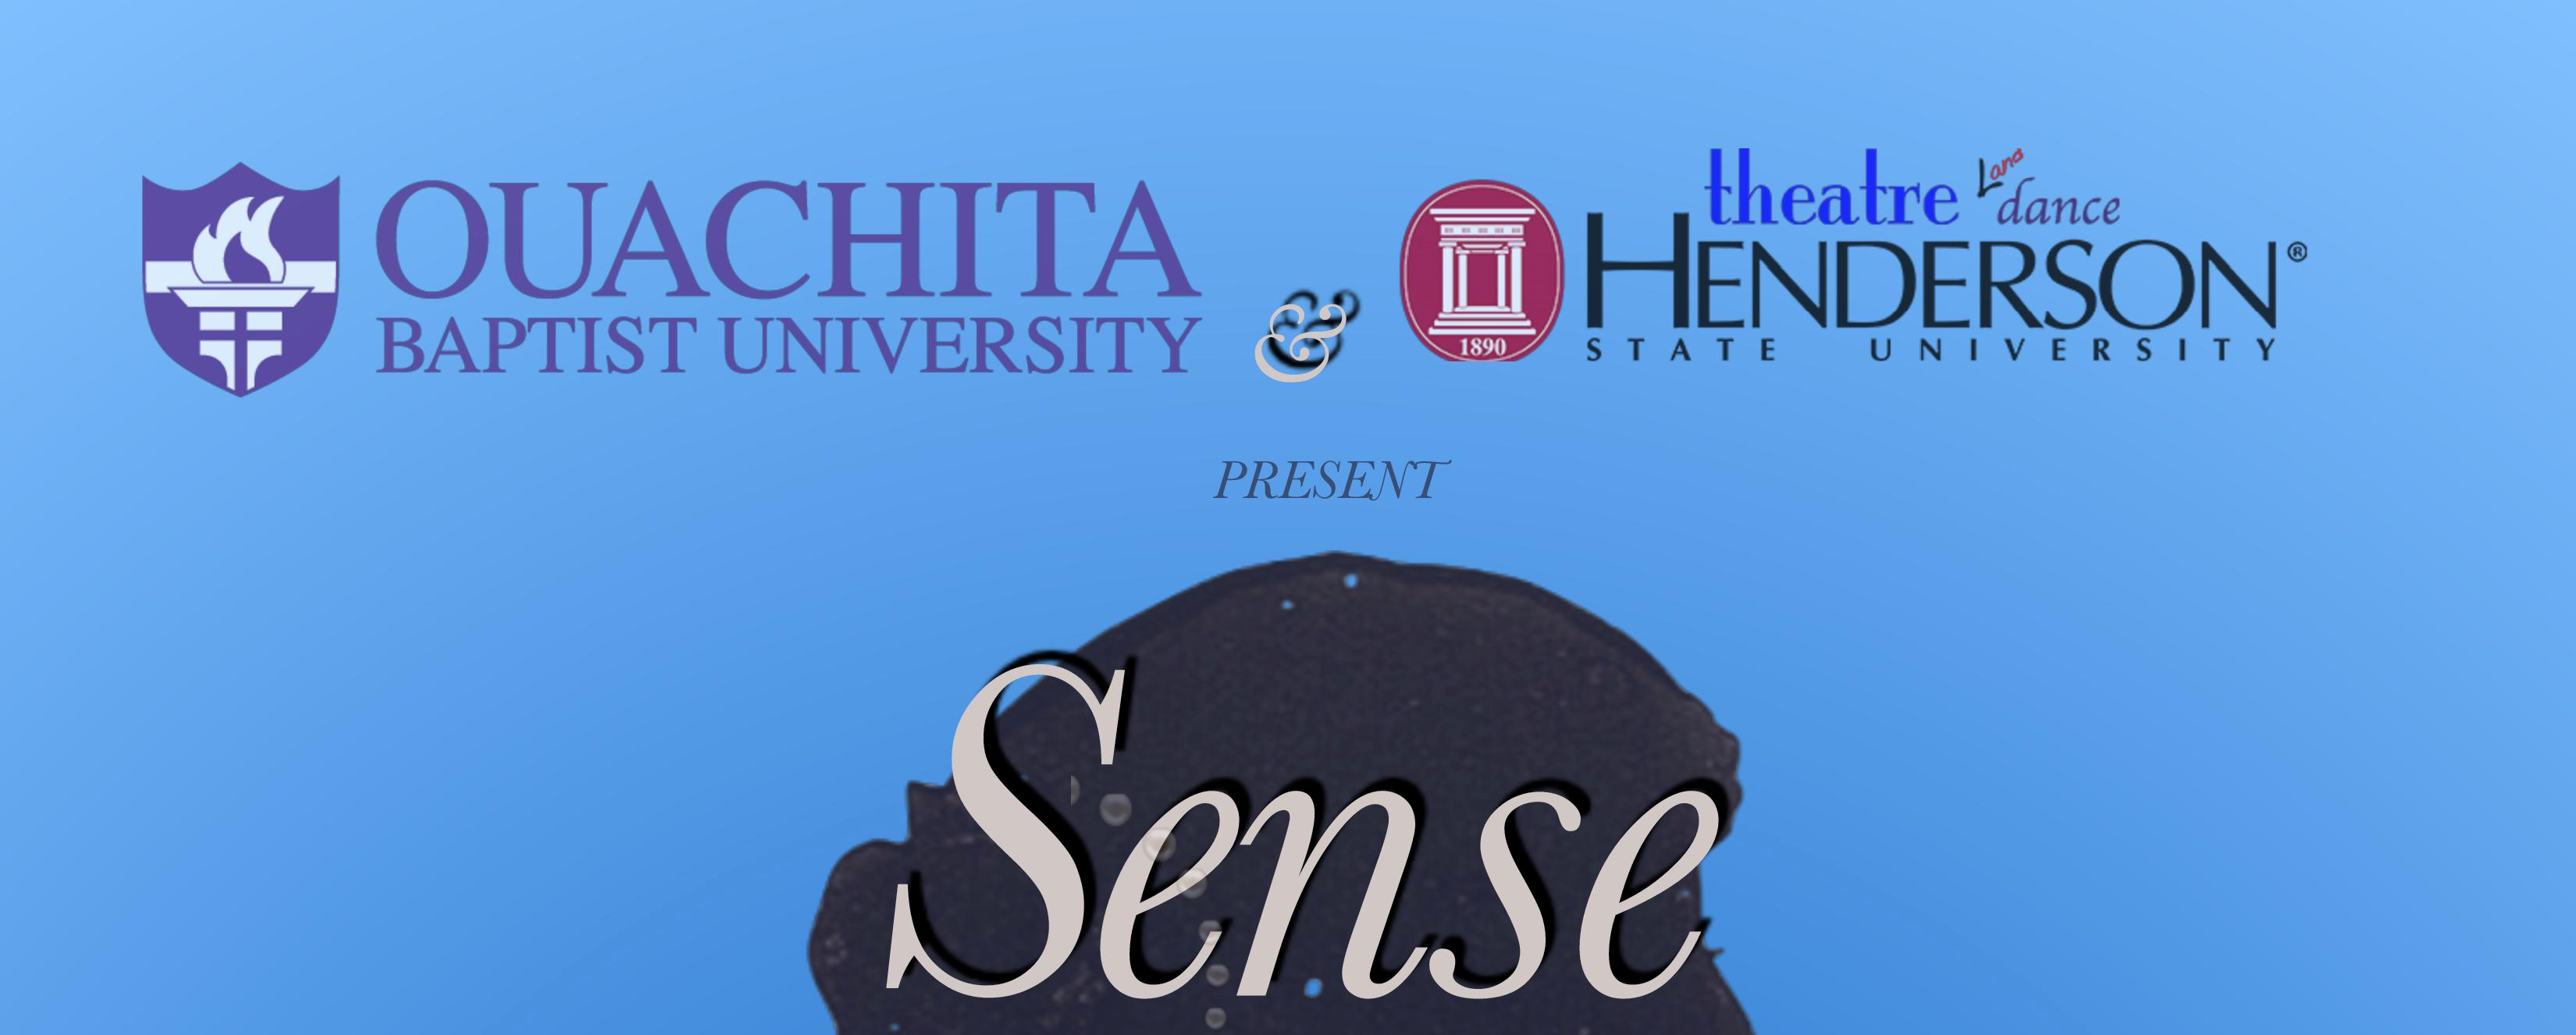  Ouachita and Henderson State’s theatre departments to co-produce “Sense and Sensibility” the week of Battle of the Ravine.